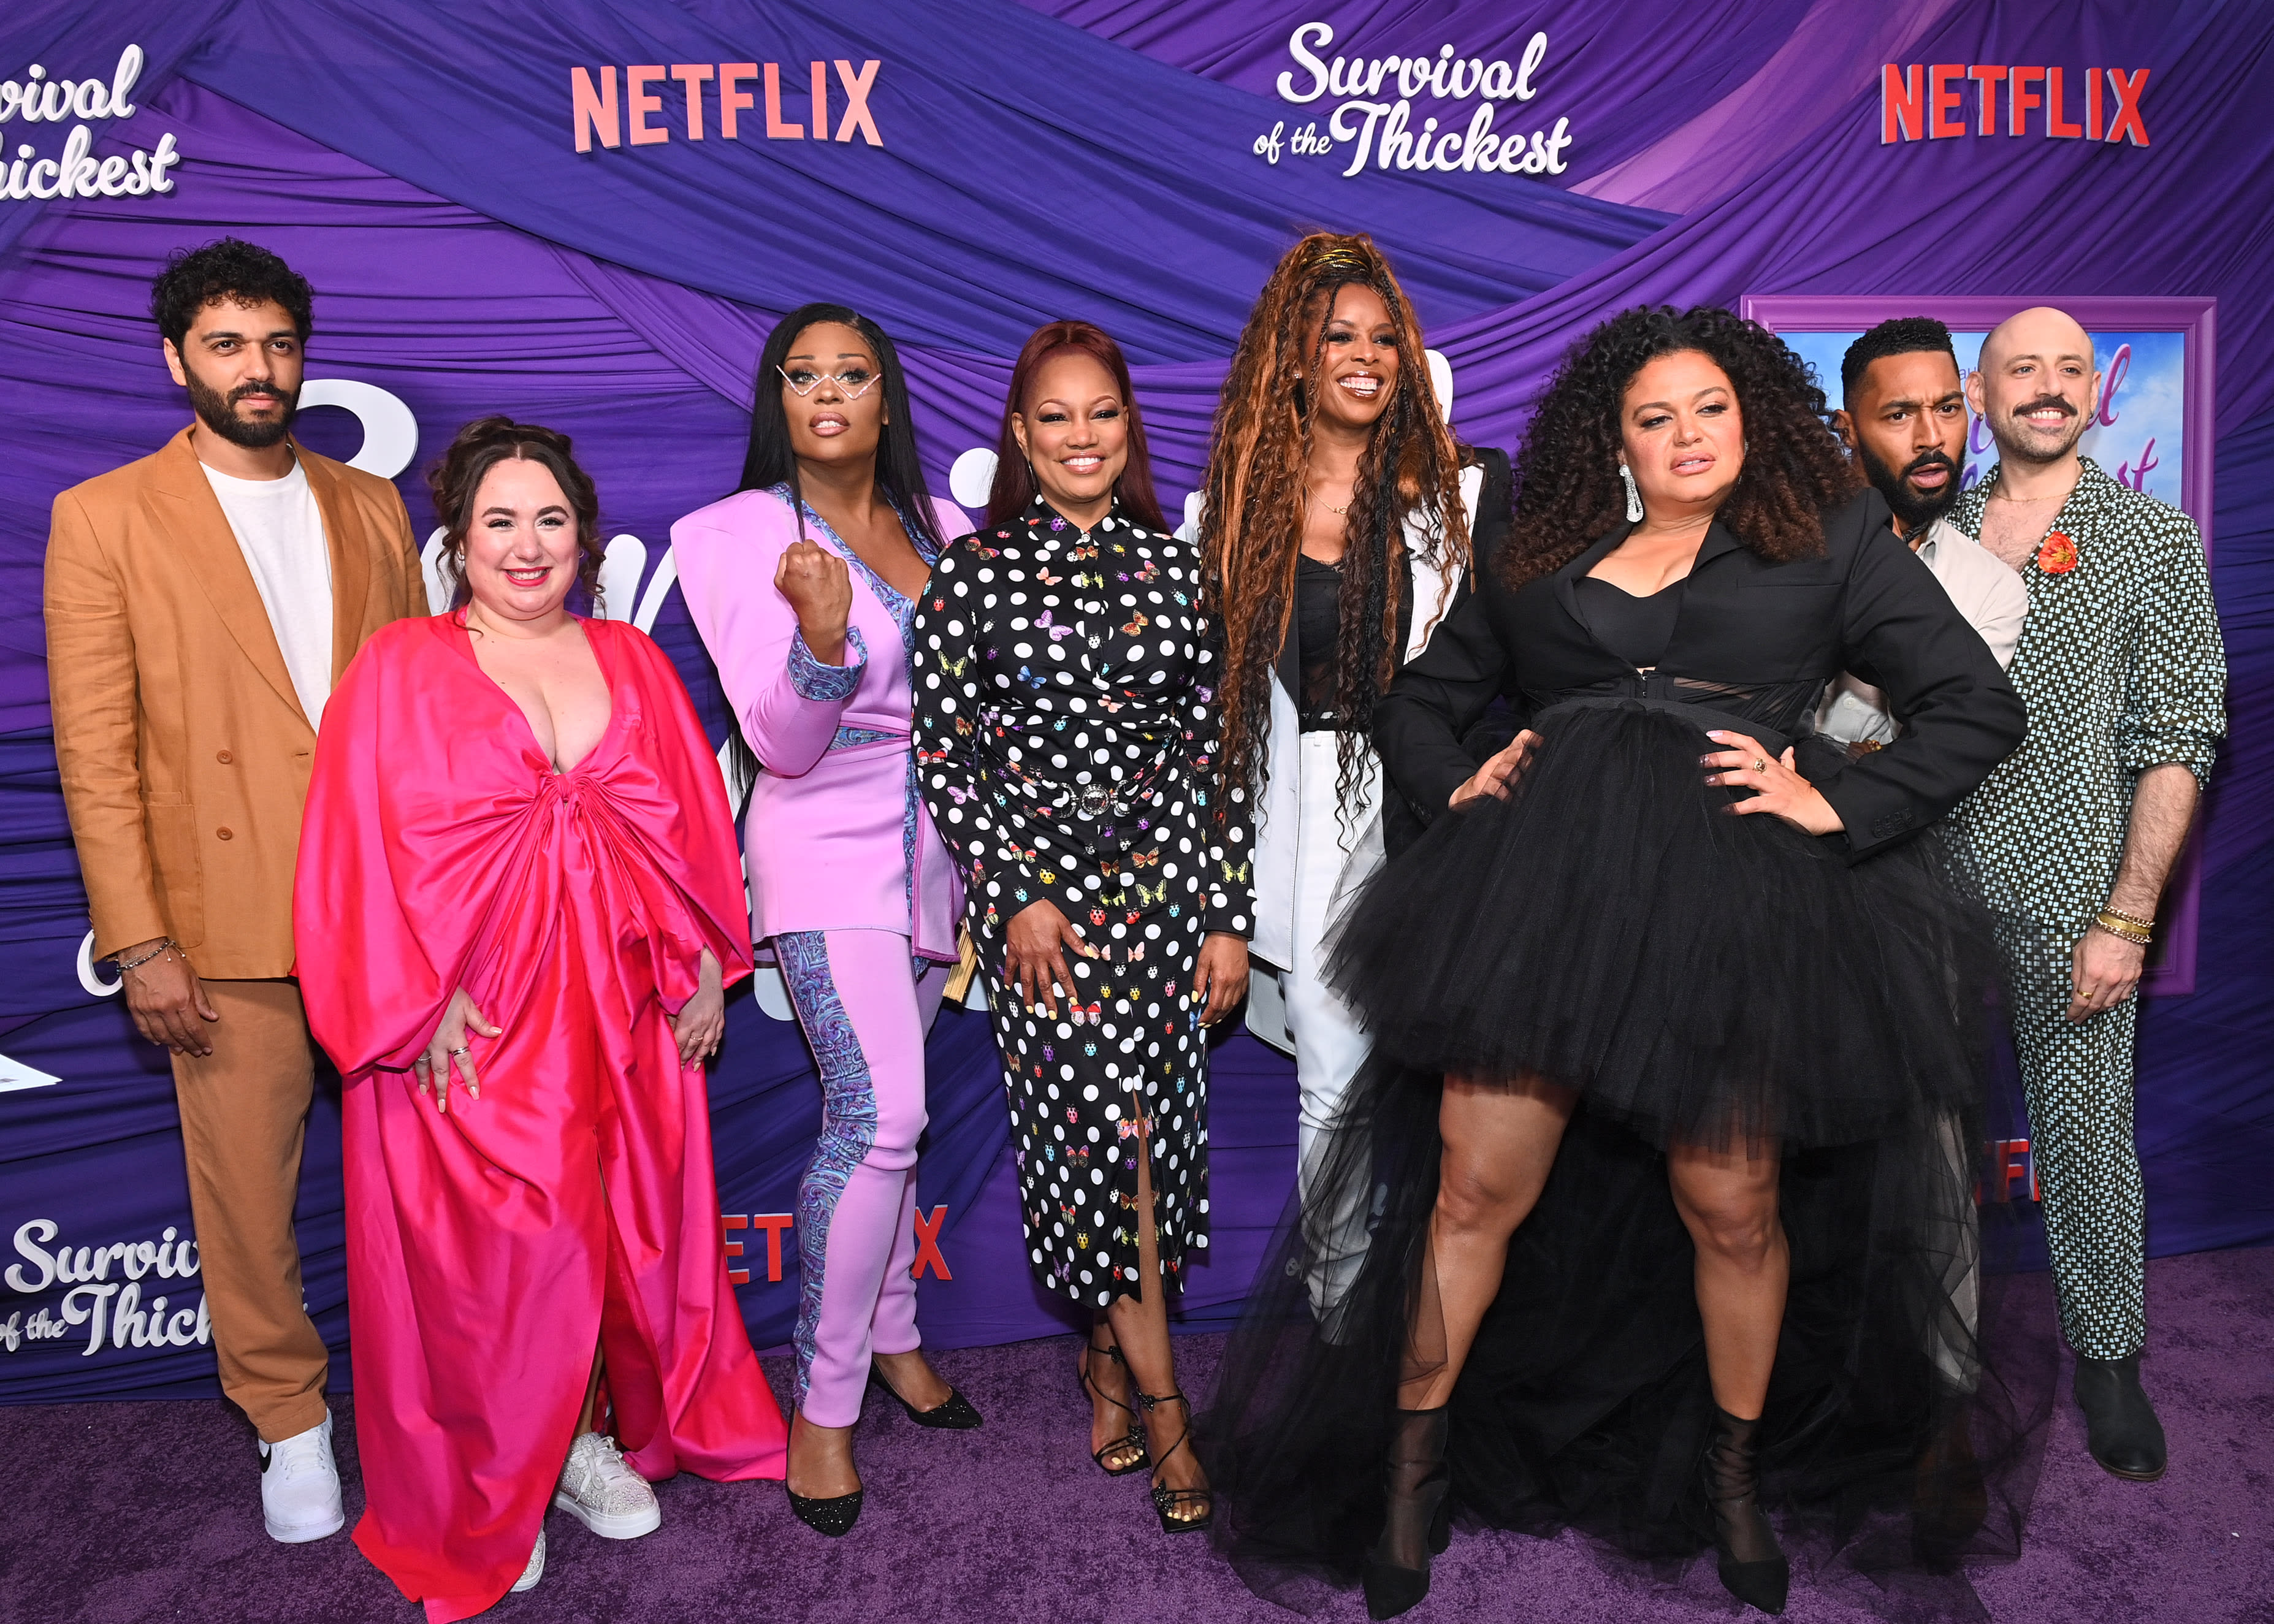 Teaser Trailer to Netflix Comedy Series 'Survival of the Thickest